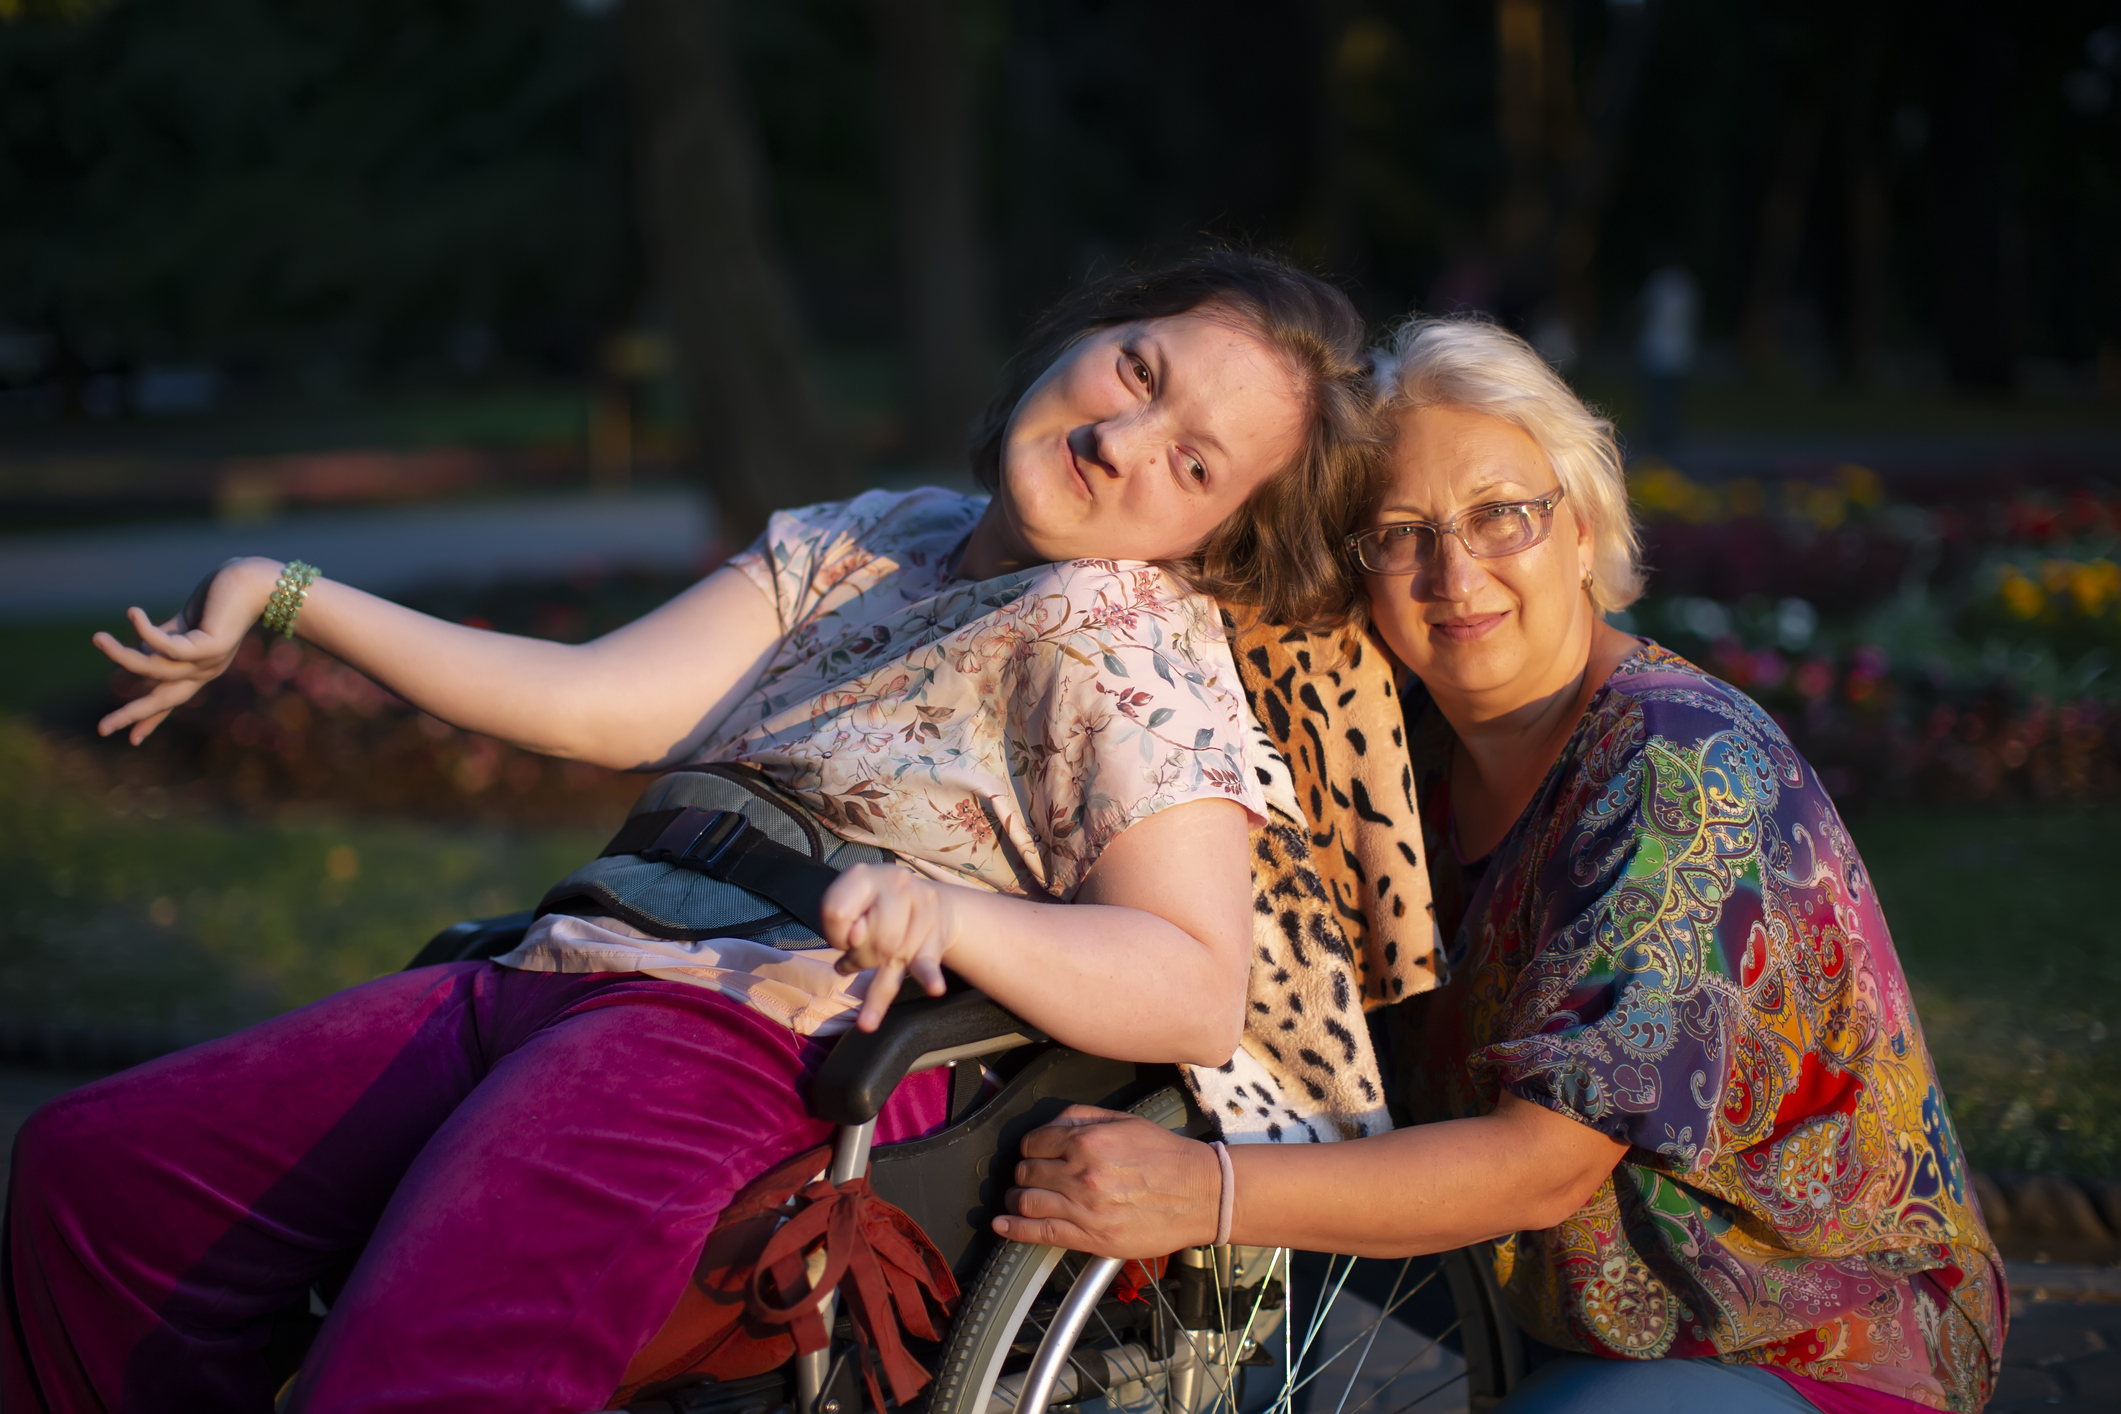 Can an existing 65-year-old single resident request to have their disabled adult child move into the property?